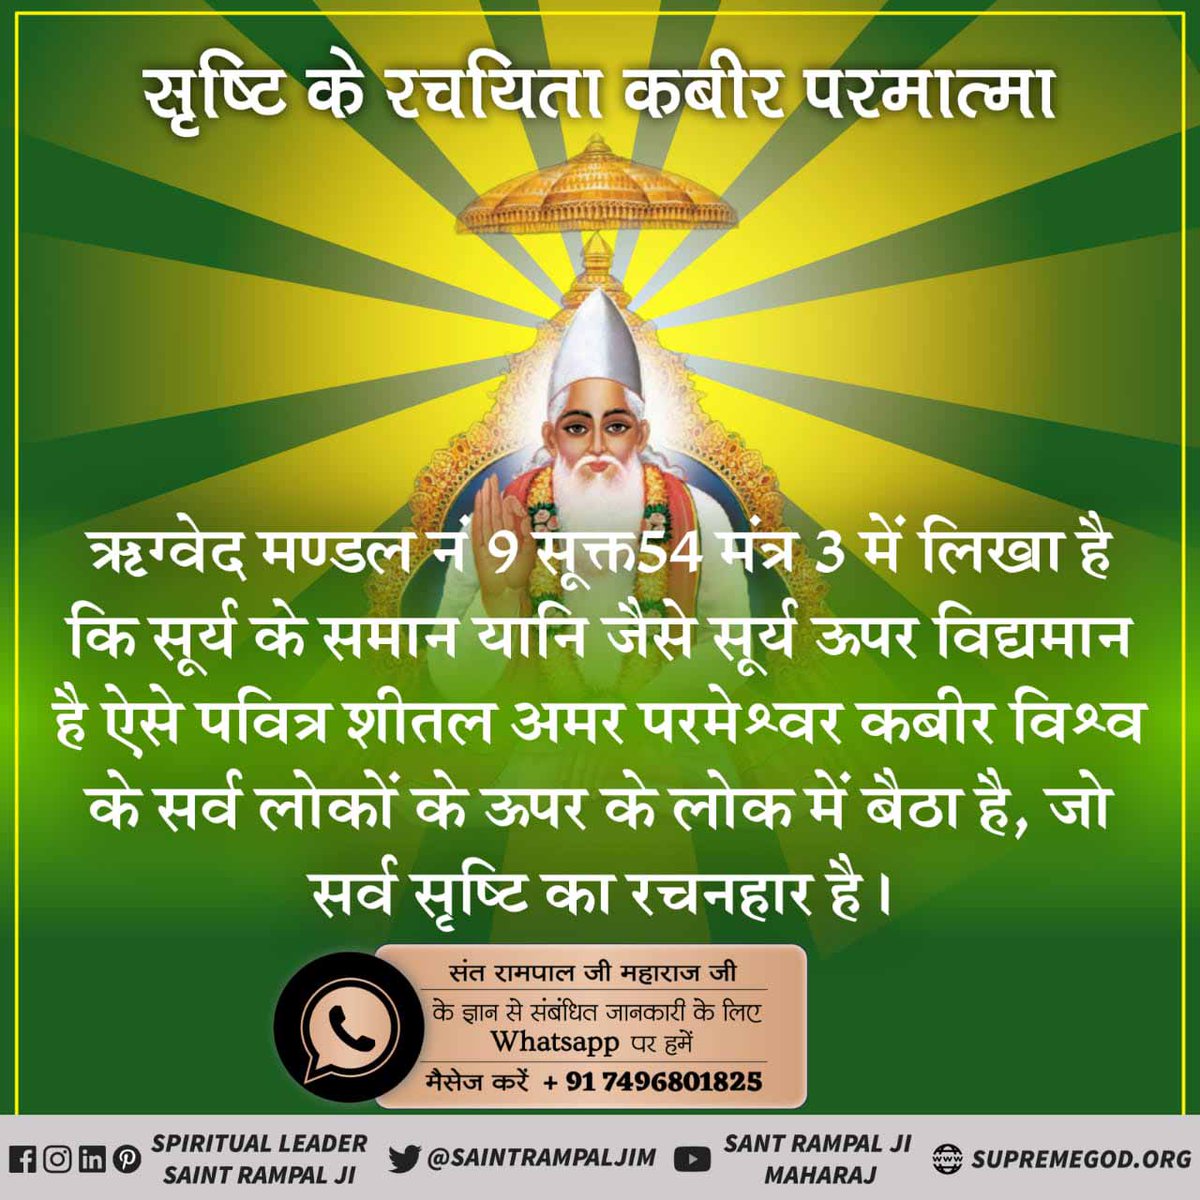 Those who receive the #HumanLife but do not engage in devotion to the #SupremeGod live a useless Life.
#सत_भक्ति_संदेश़
#GodMorningMonday
@anitada23854181
@PREETI782
@Akanksh47093996